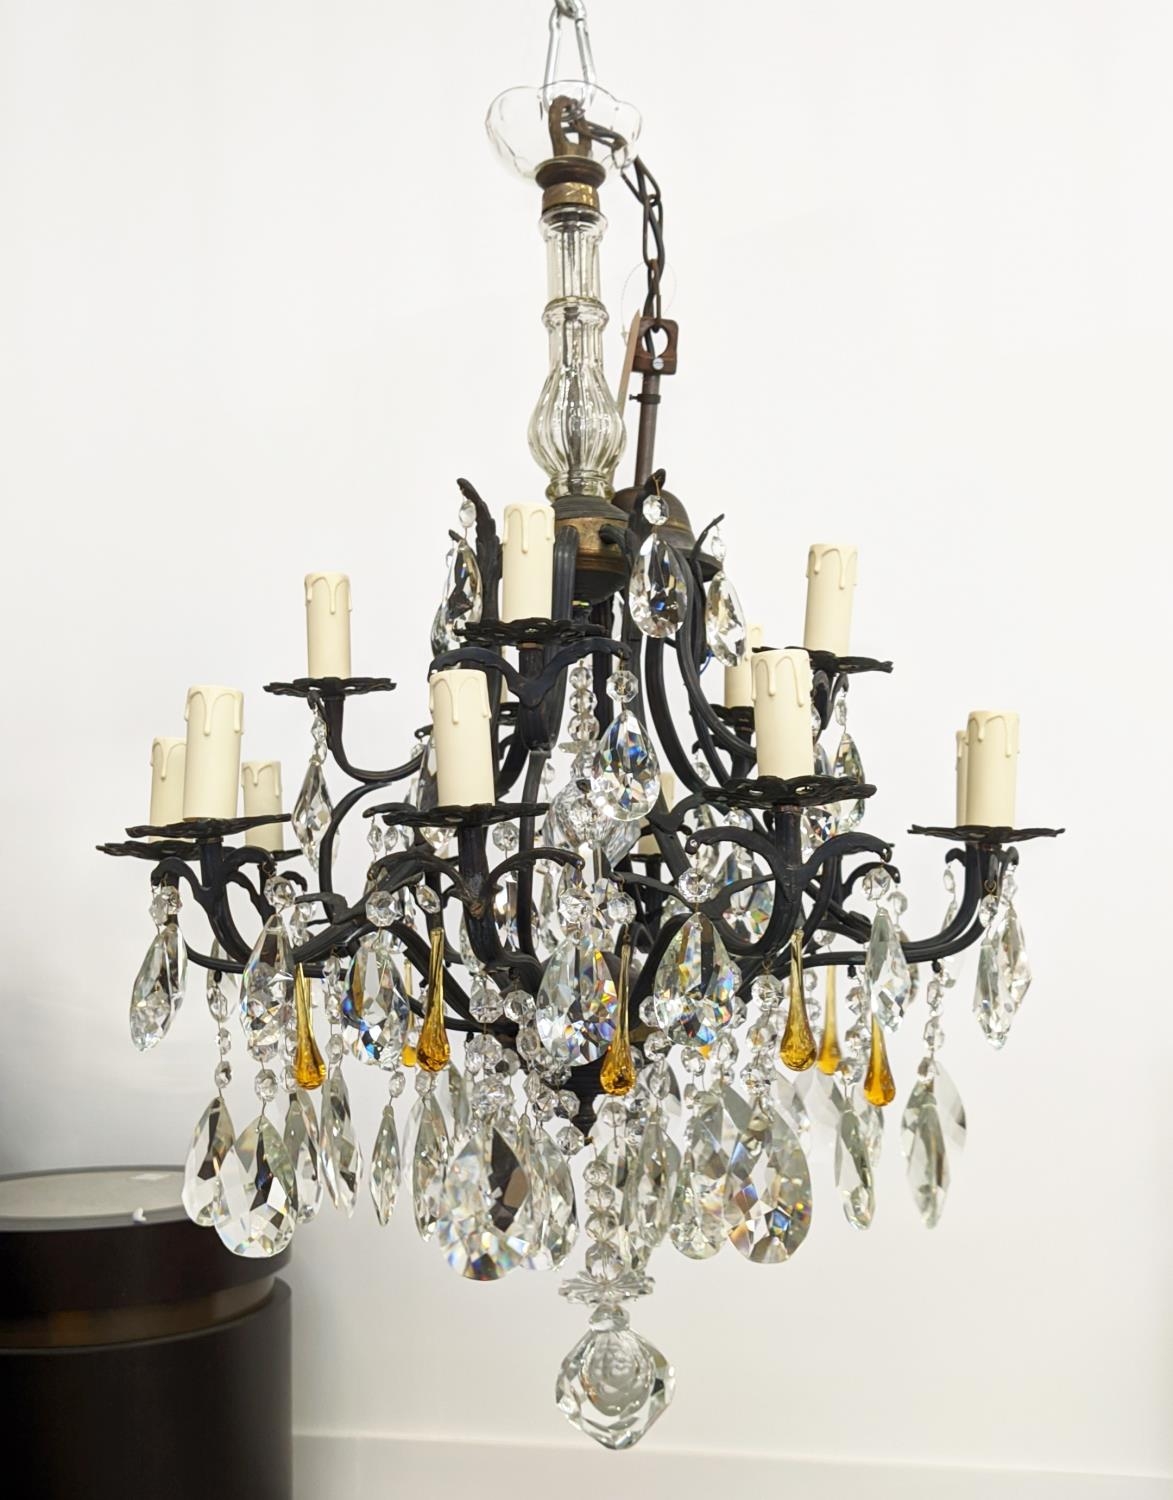 CHANDELIER, patinated metal with clear and amber glass drops from fifteen lights, 60cm W x 114cm - Bild 5 aus 18